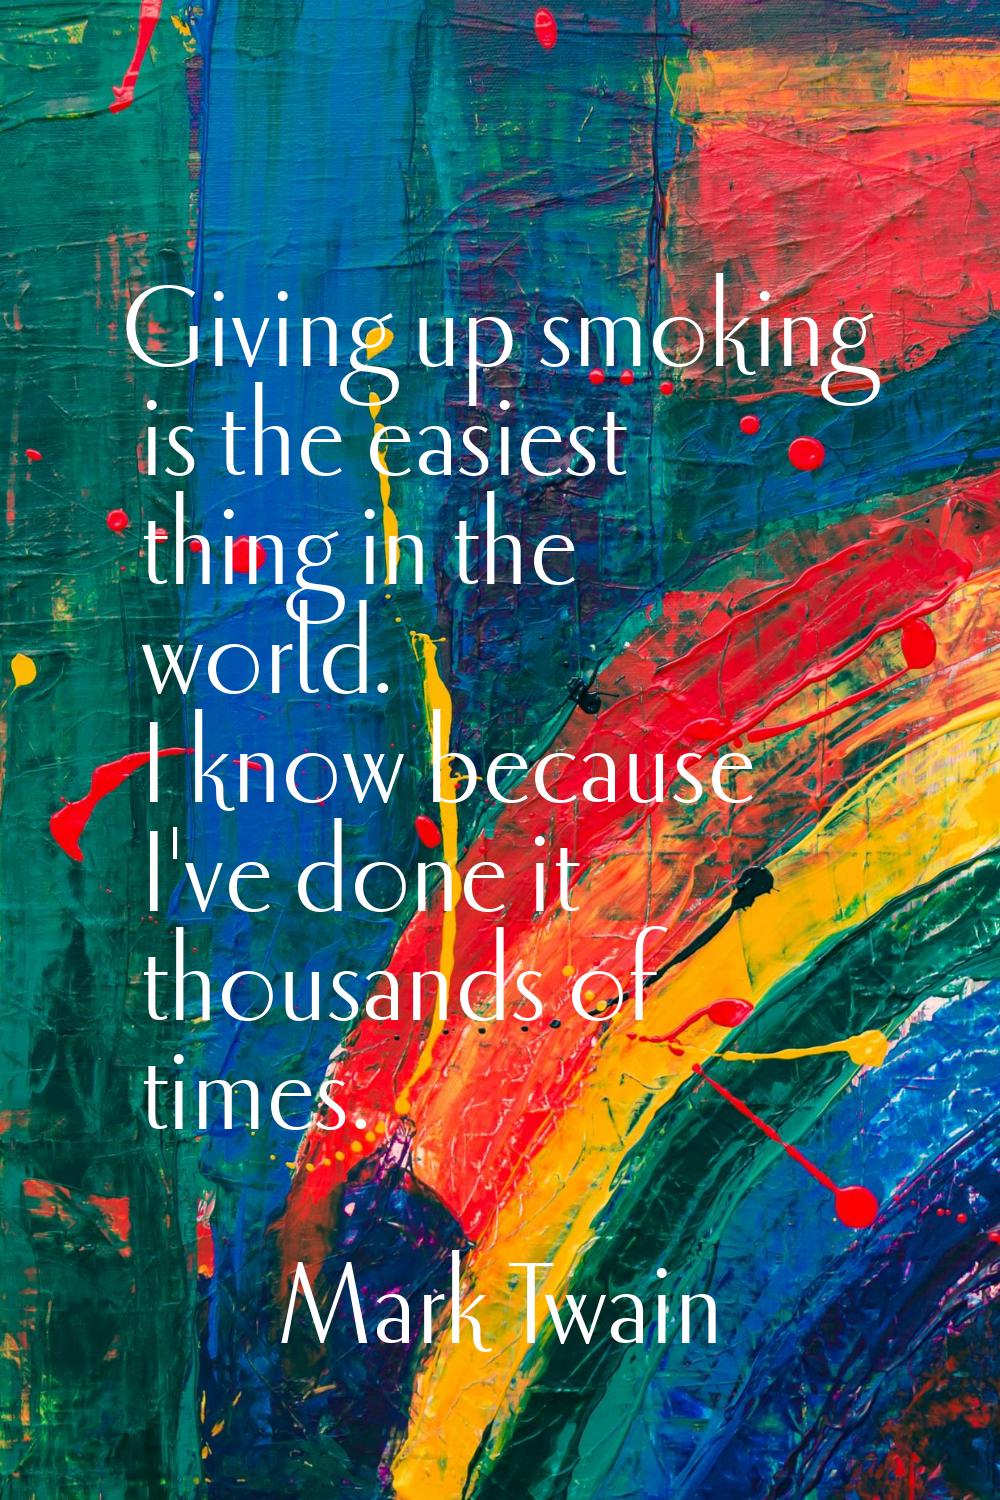 Giving up smoking is the easiest thing in the world. I know because I've done it thousands of times